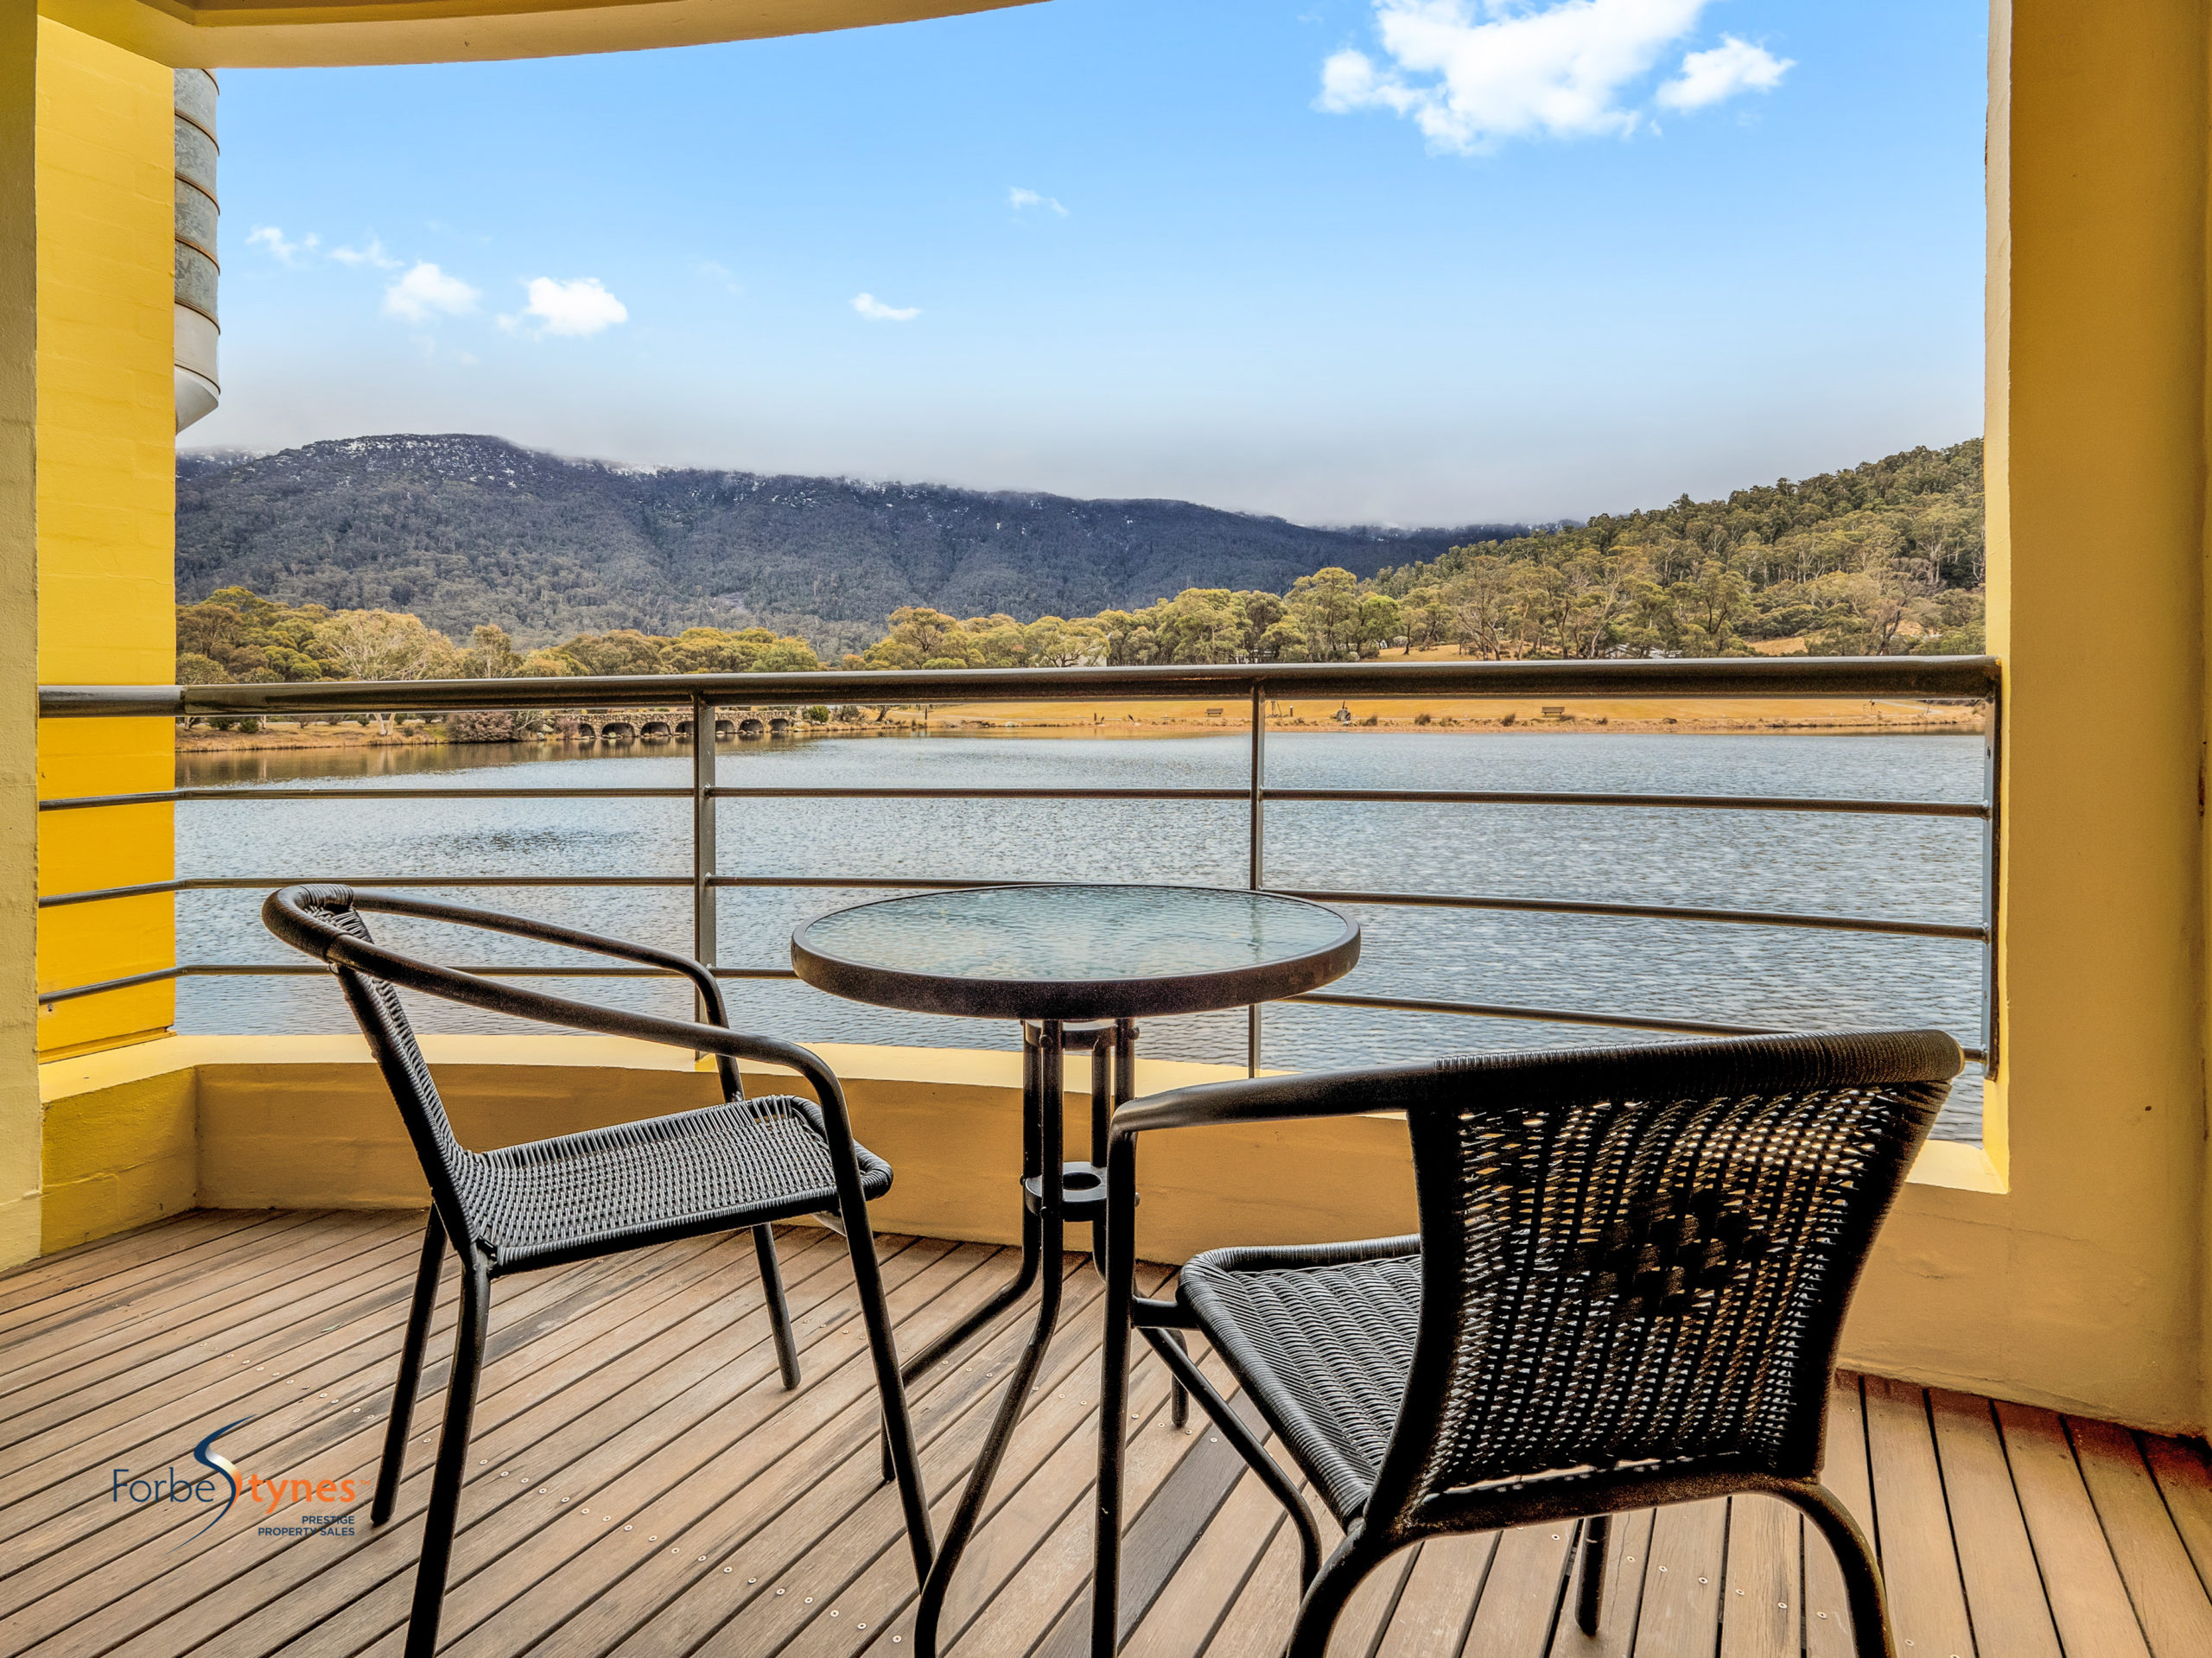 Two Bedroom Conveniently Located Lakeside Apartment, Lake Crackenback – Price: Offers Over $750,000